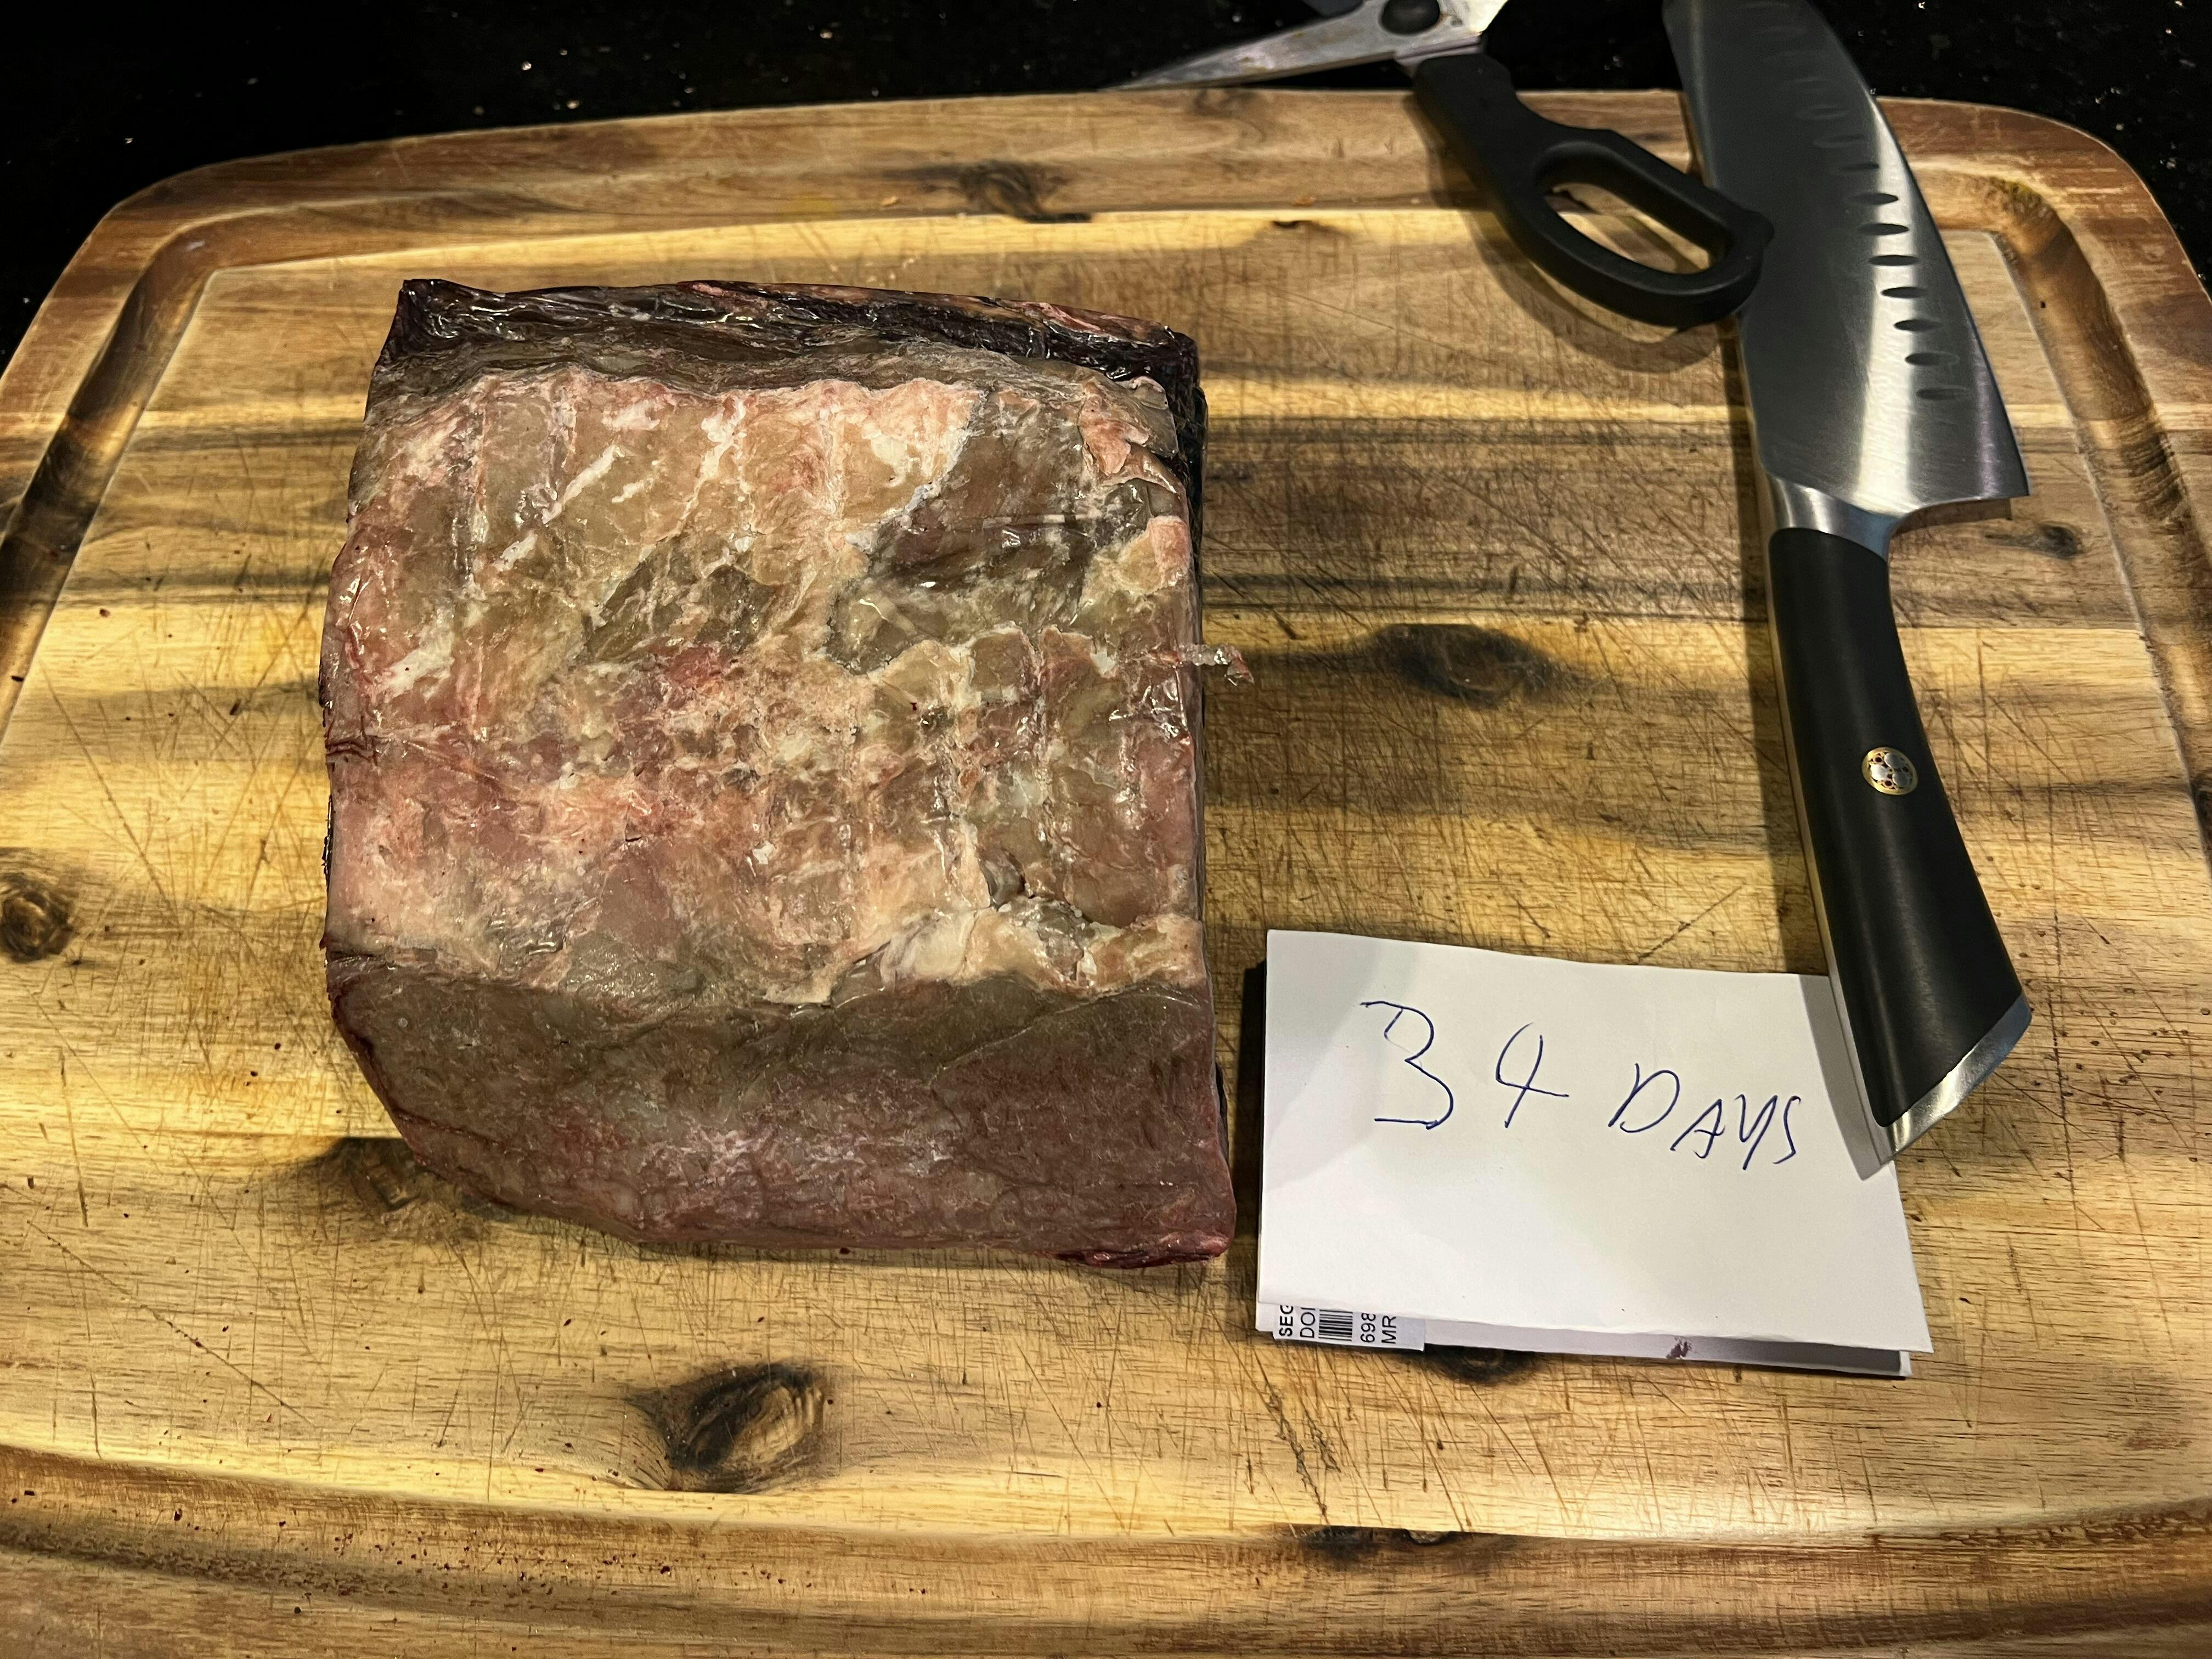 https://judgeme.imgix.net/dryagingbags-the-best-way-to-dry-age-meat-at-home/1684707078__img_8202__original.jpeg?auto=format